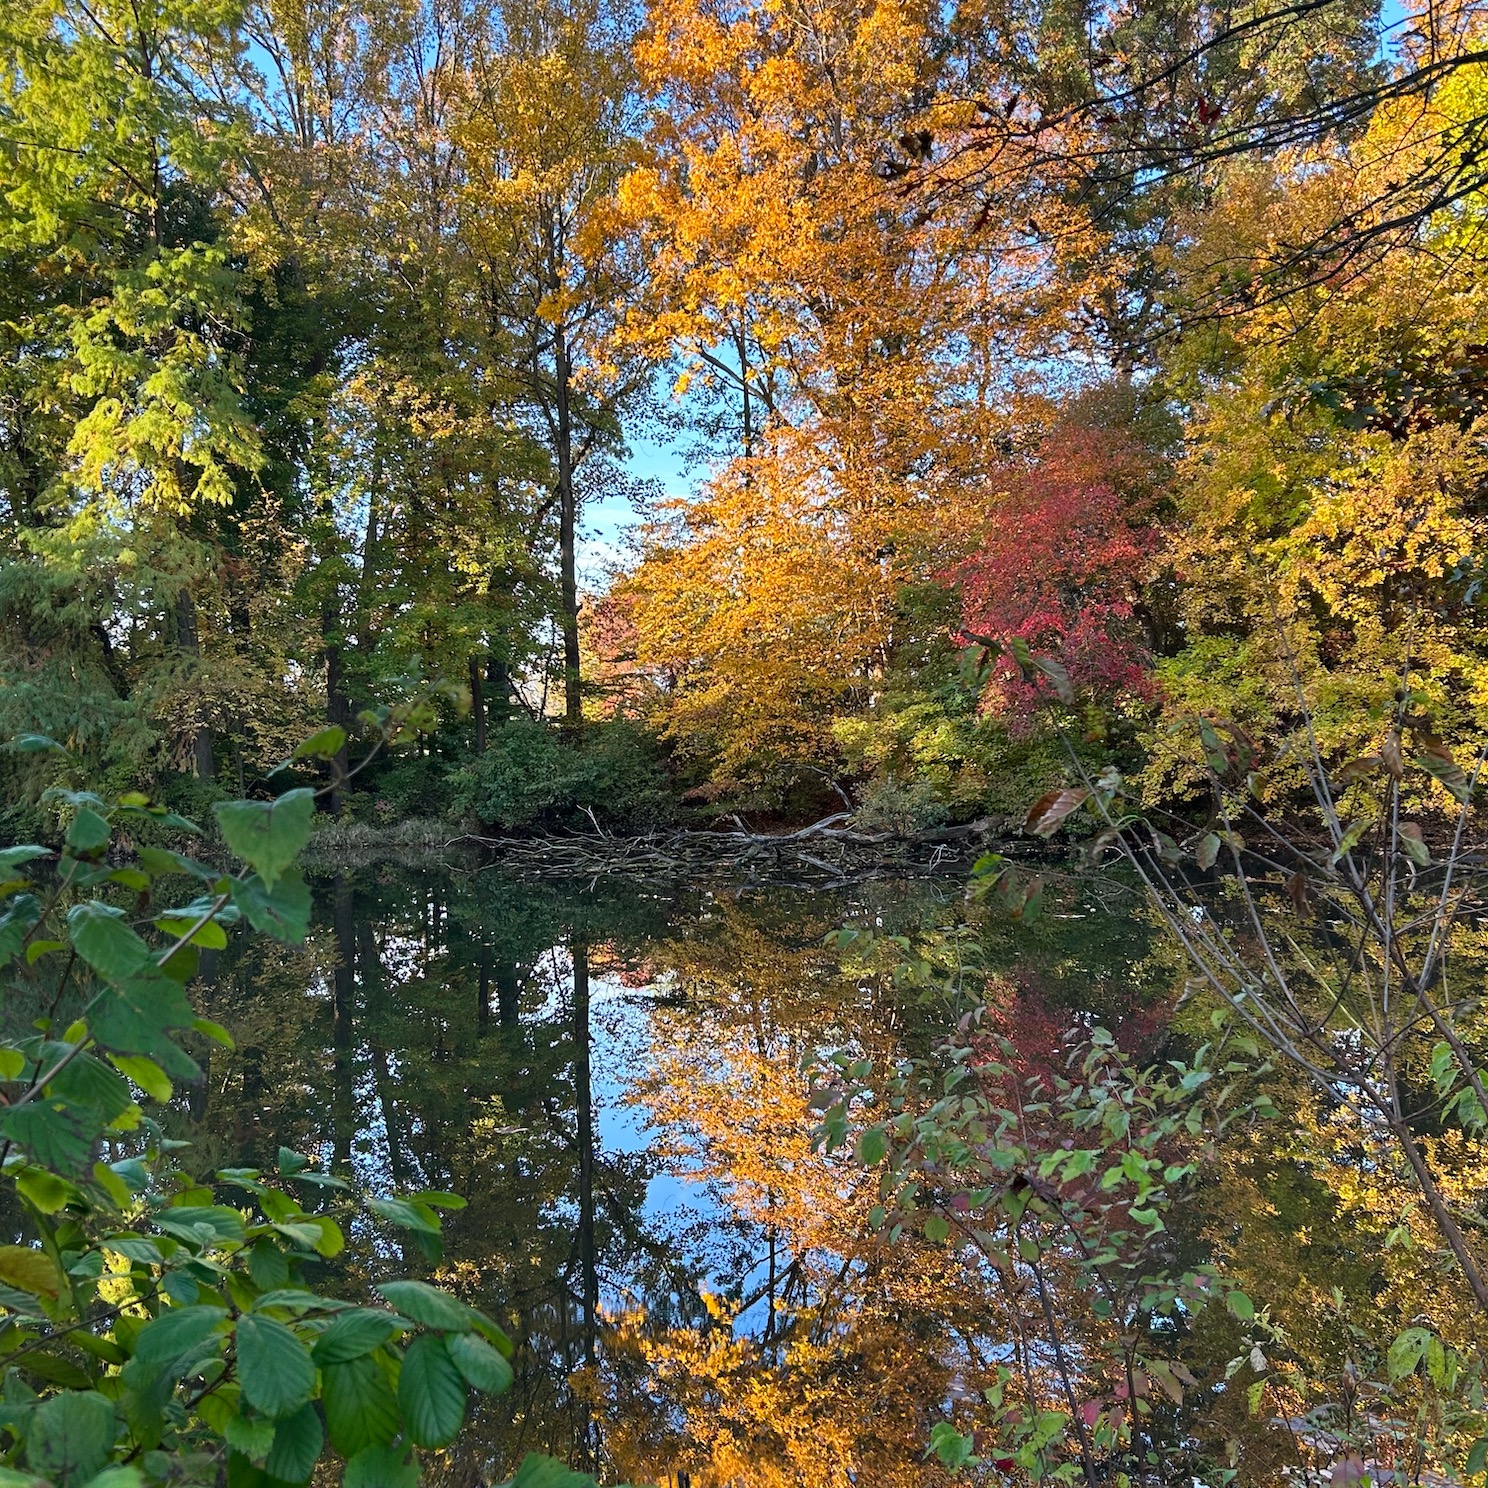 Trees in their autumn colors, reflecting off a lake